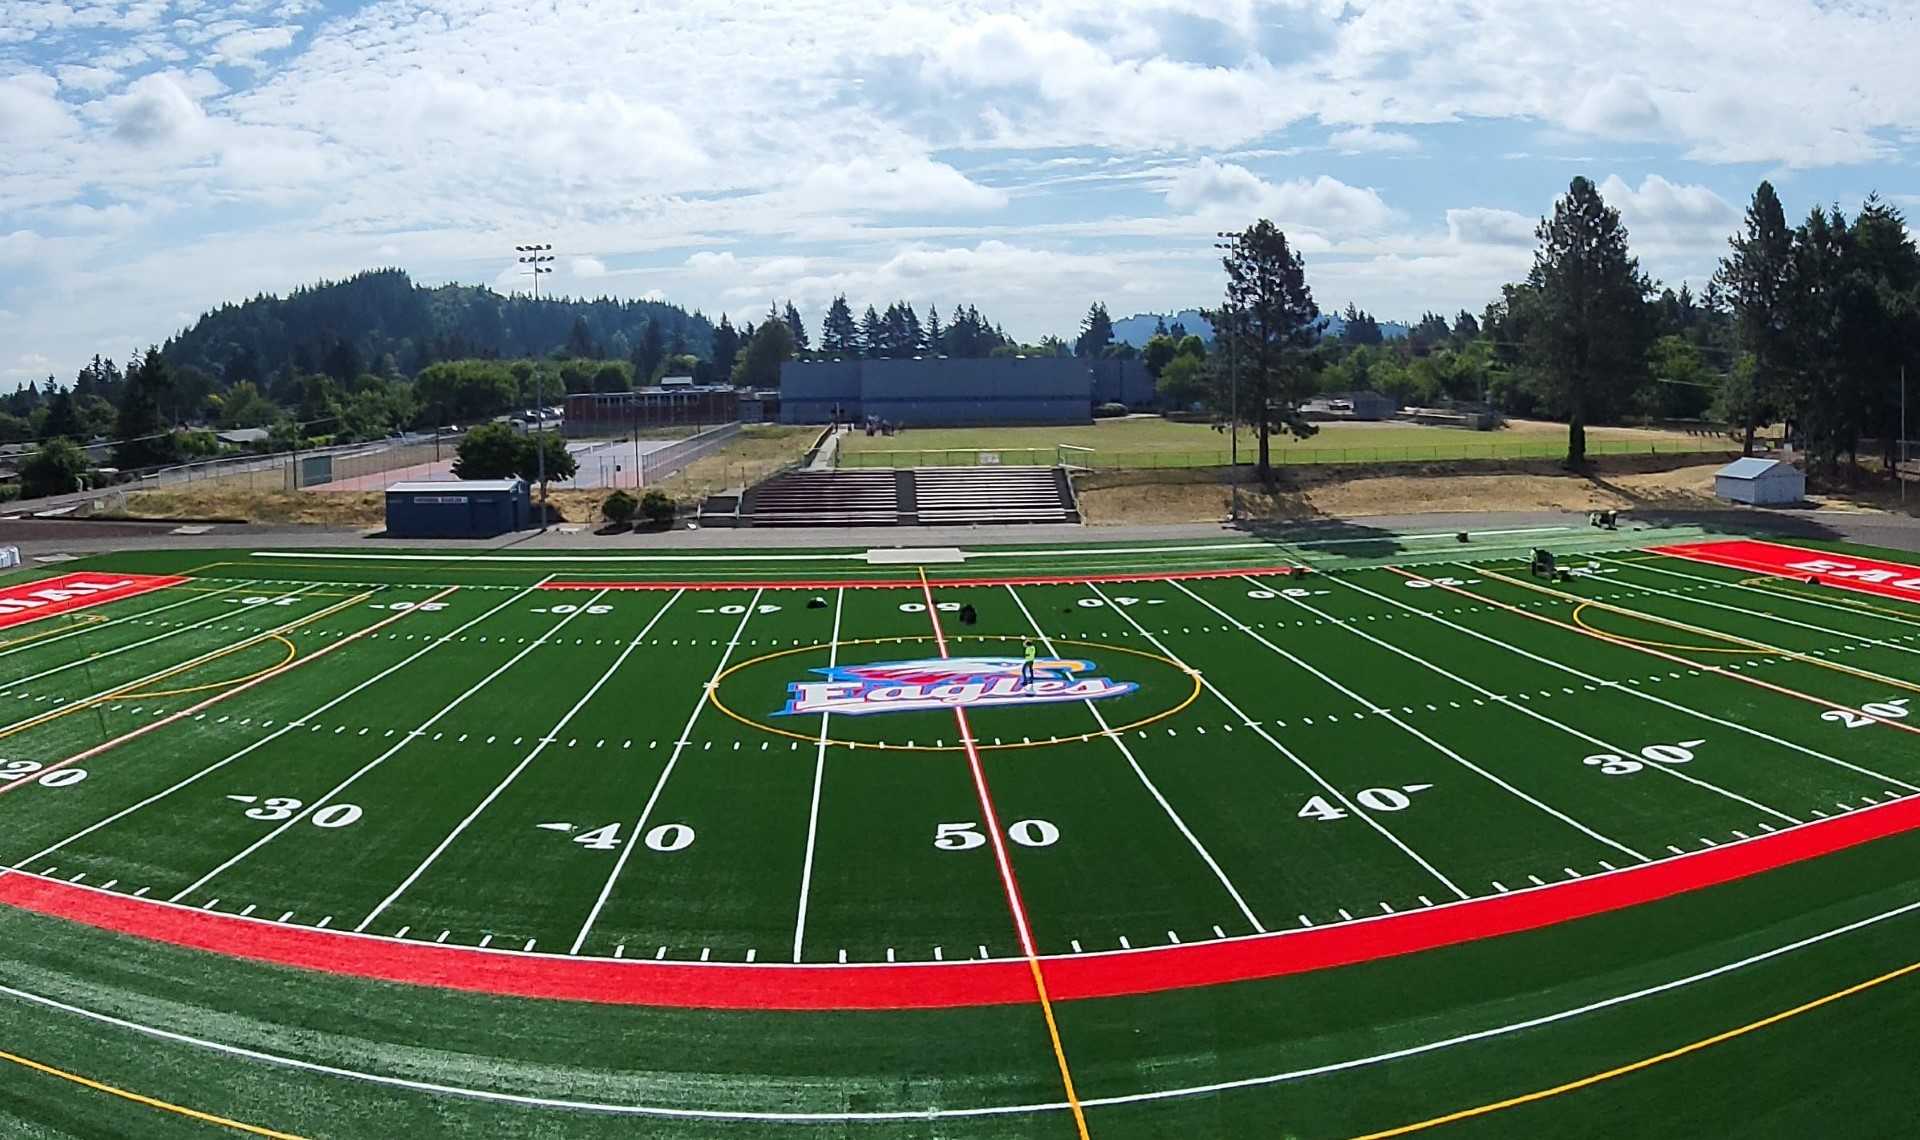 Workers removed about 9,000 yards of dirt to level a 36-inch crown before Centennial's artificial turf was installed.